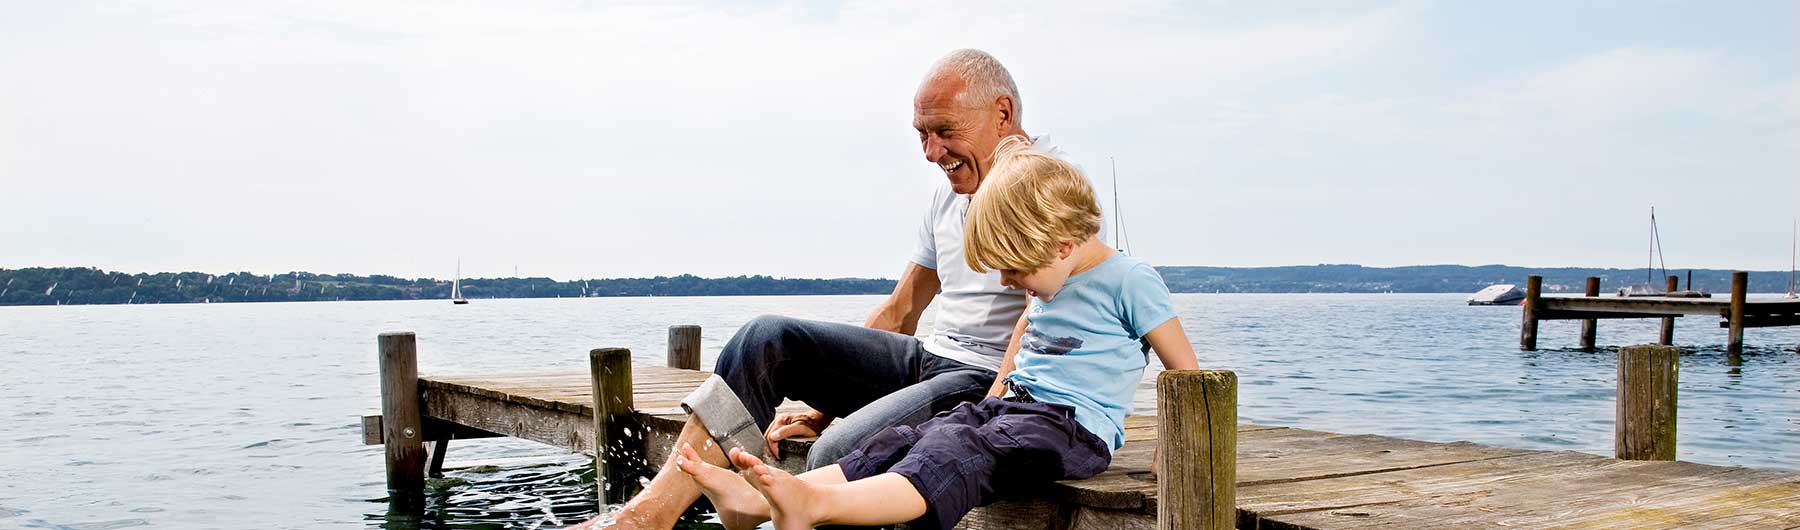 Elderly-man-and-boy-with-feet-in-water